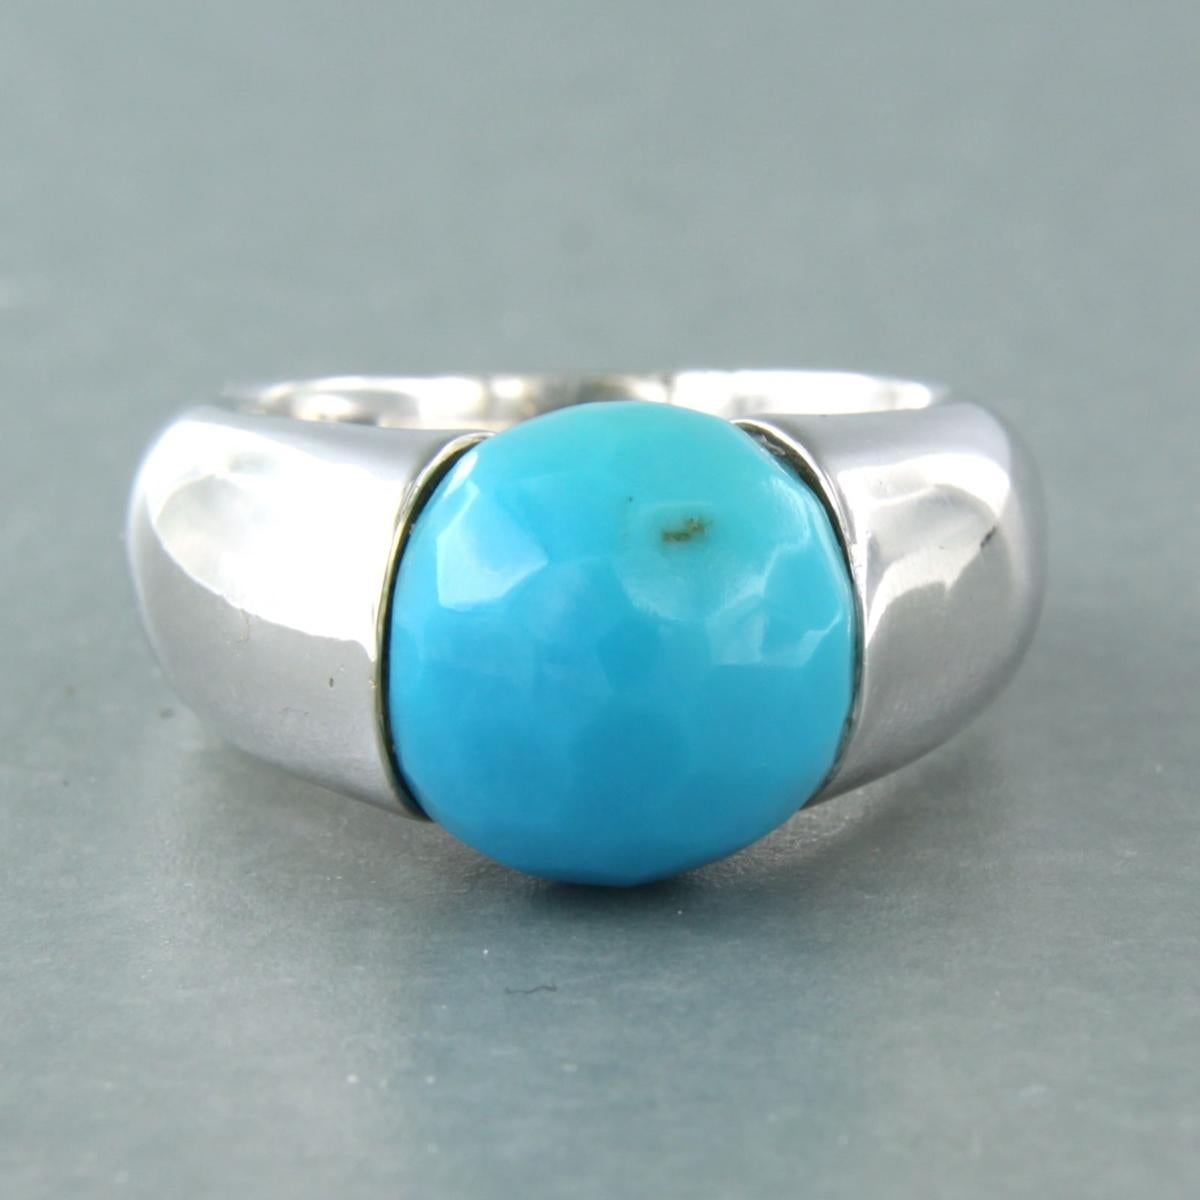 14k white gold ring set with turquoise - ring size US 7.5 - EU. 17.75 (56)

detailed description:

the top of the ring is 1.3 cm wide

weight 20.6 grams

ring size US 7.5 - EU. 17.75 (56), ring can be enlarged or reduced a few sizes - to a limited